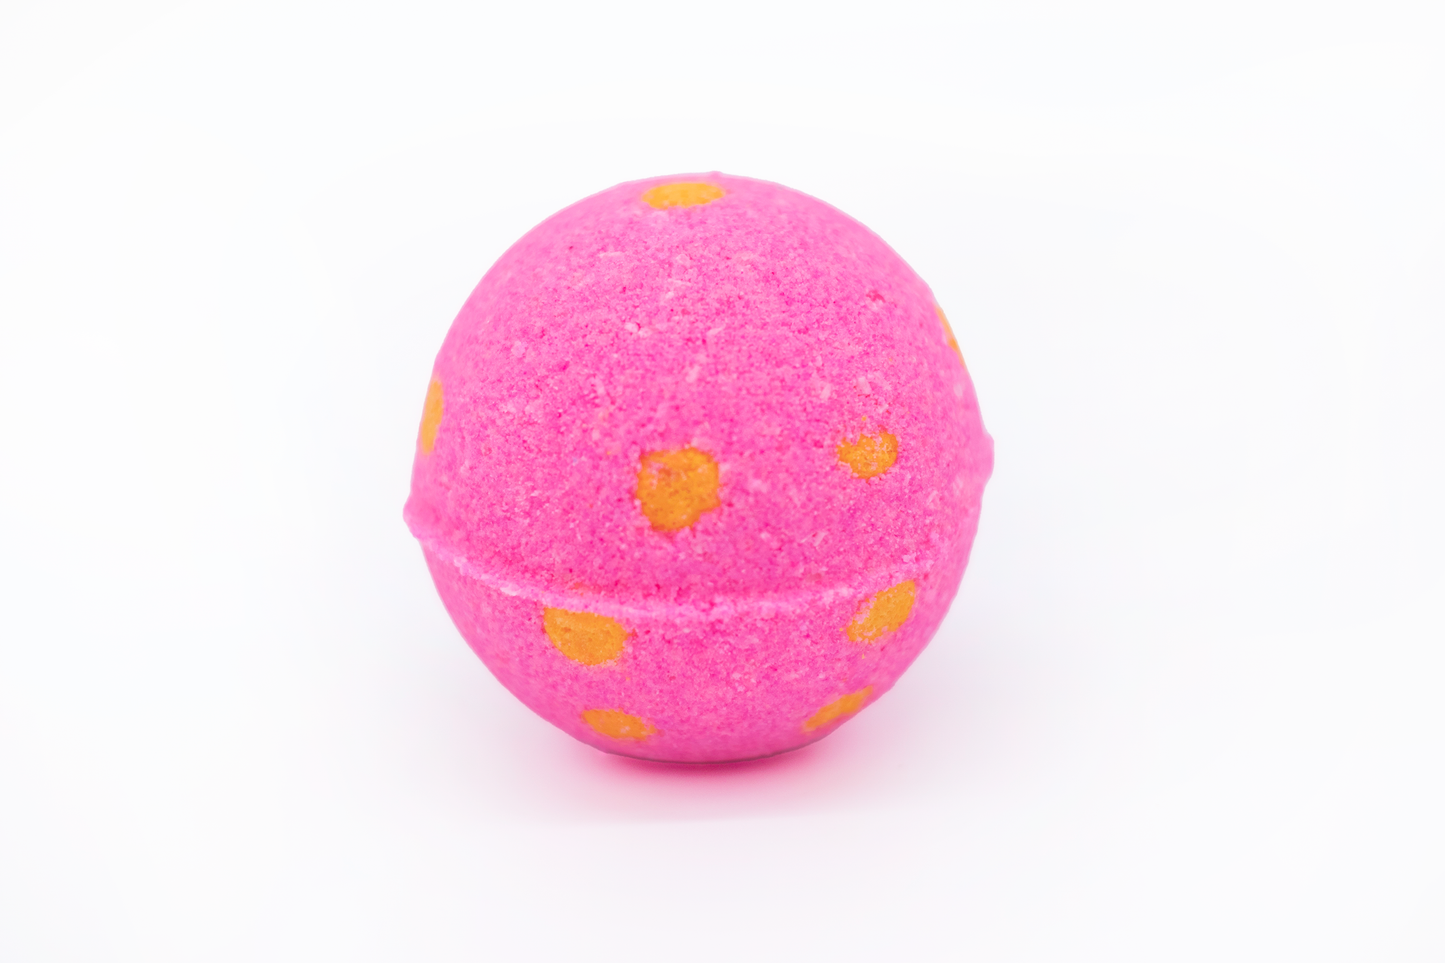 "BATH" Premium Bath Bomb for relaxation stress and calm with CBD option or without